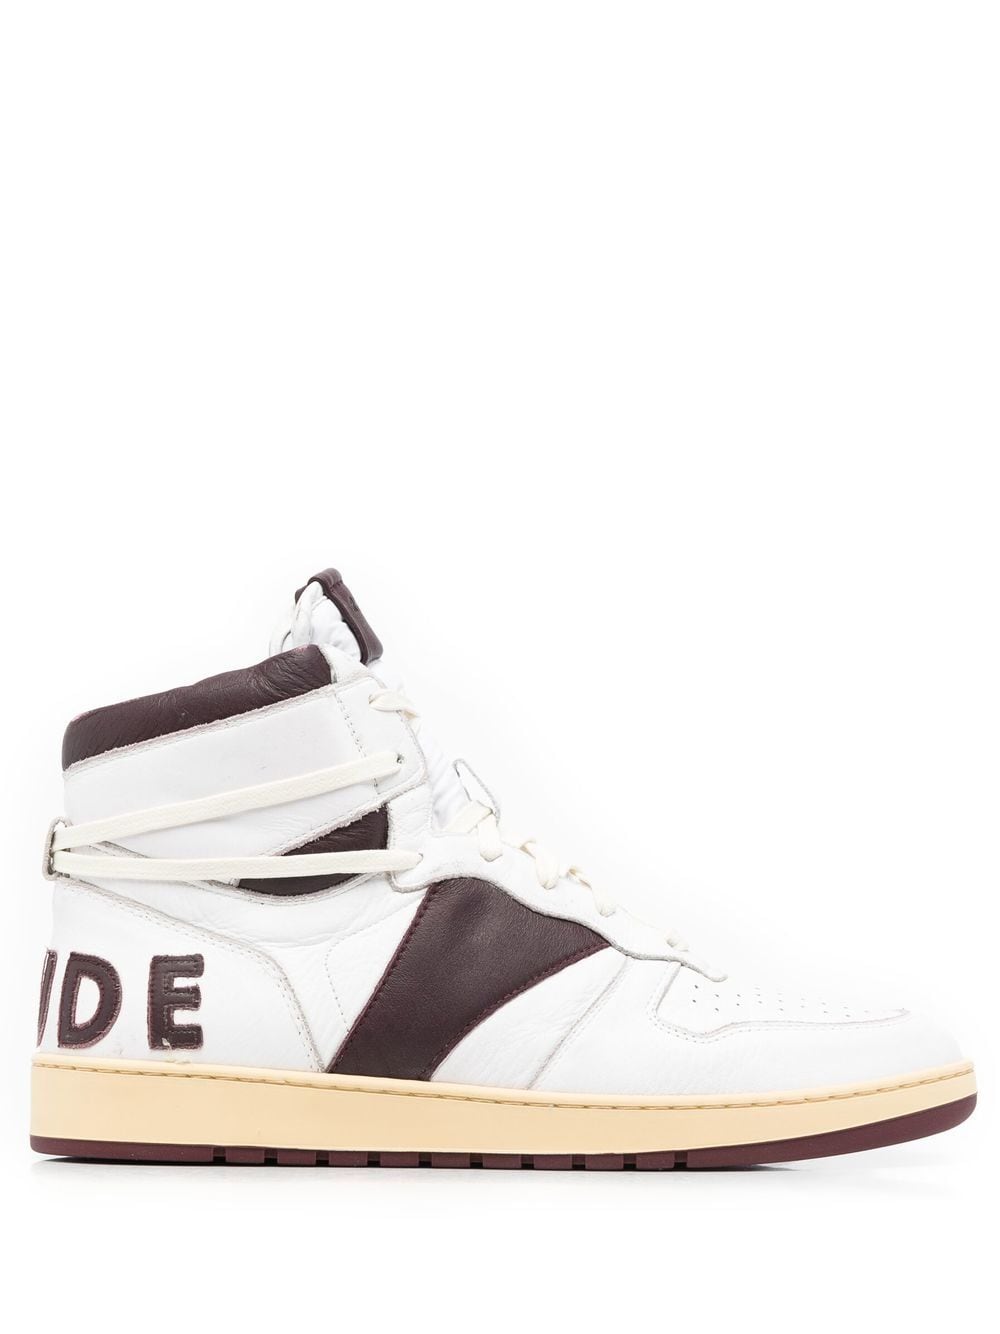 RHUDE panelled high-top sneakers - White von RHUDE